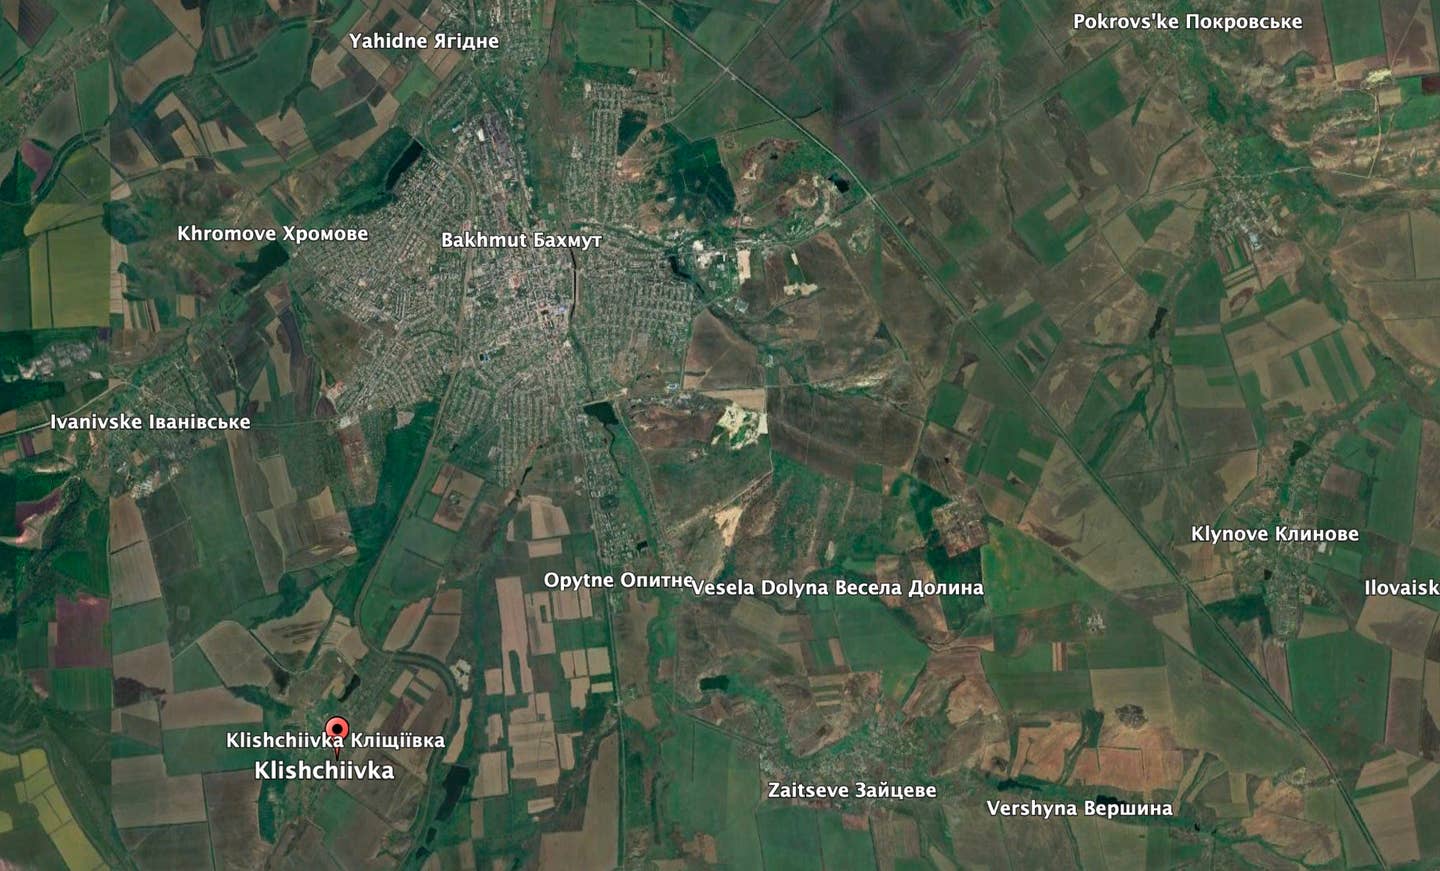 Klischiivka, a small hamlet about two miles south of Bakhmut, sits on a tactically important high ground overlooking the city. (Google Earth image)